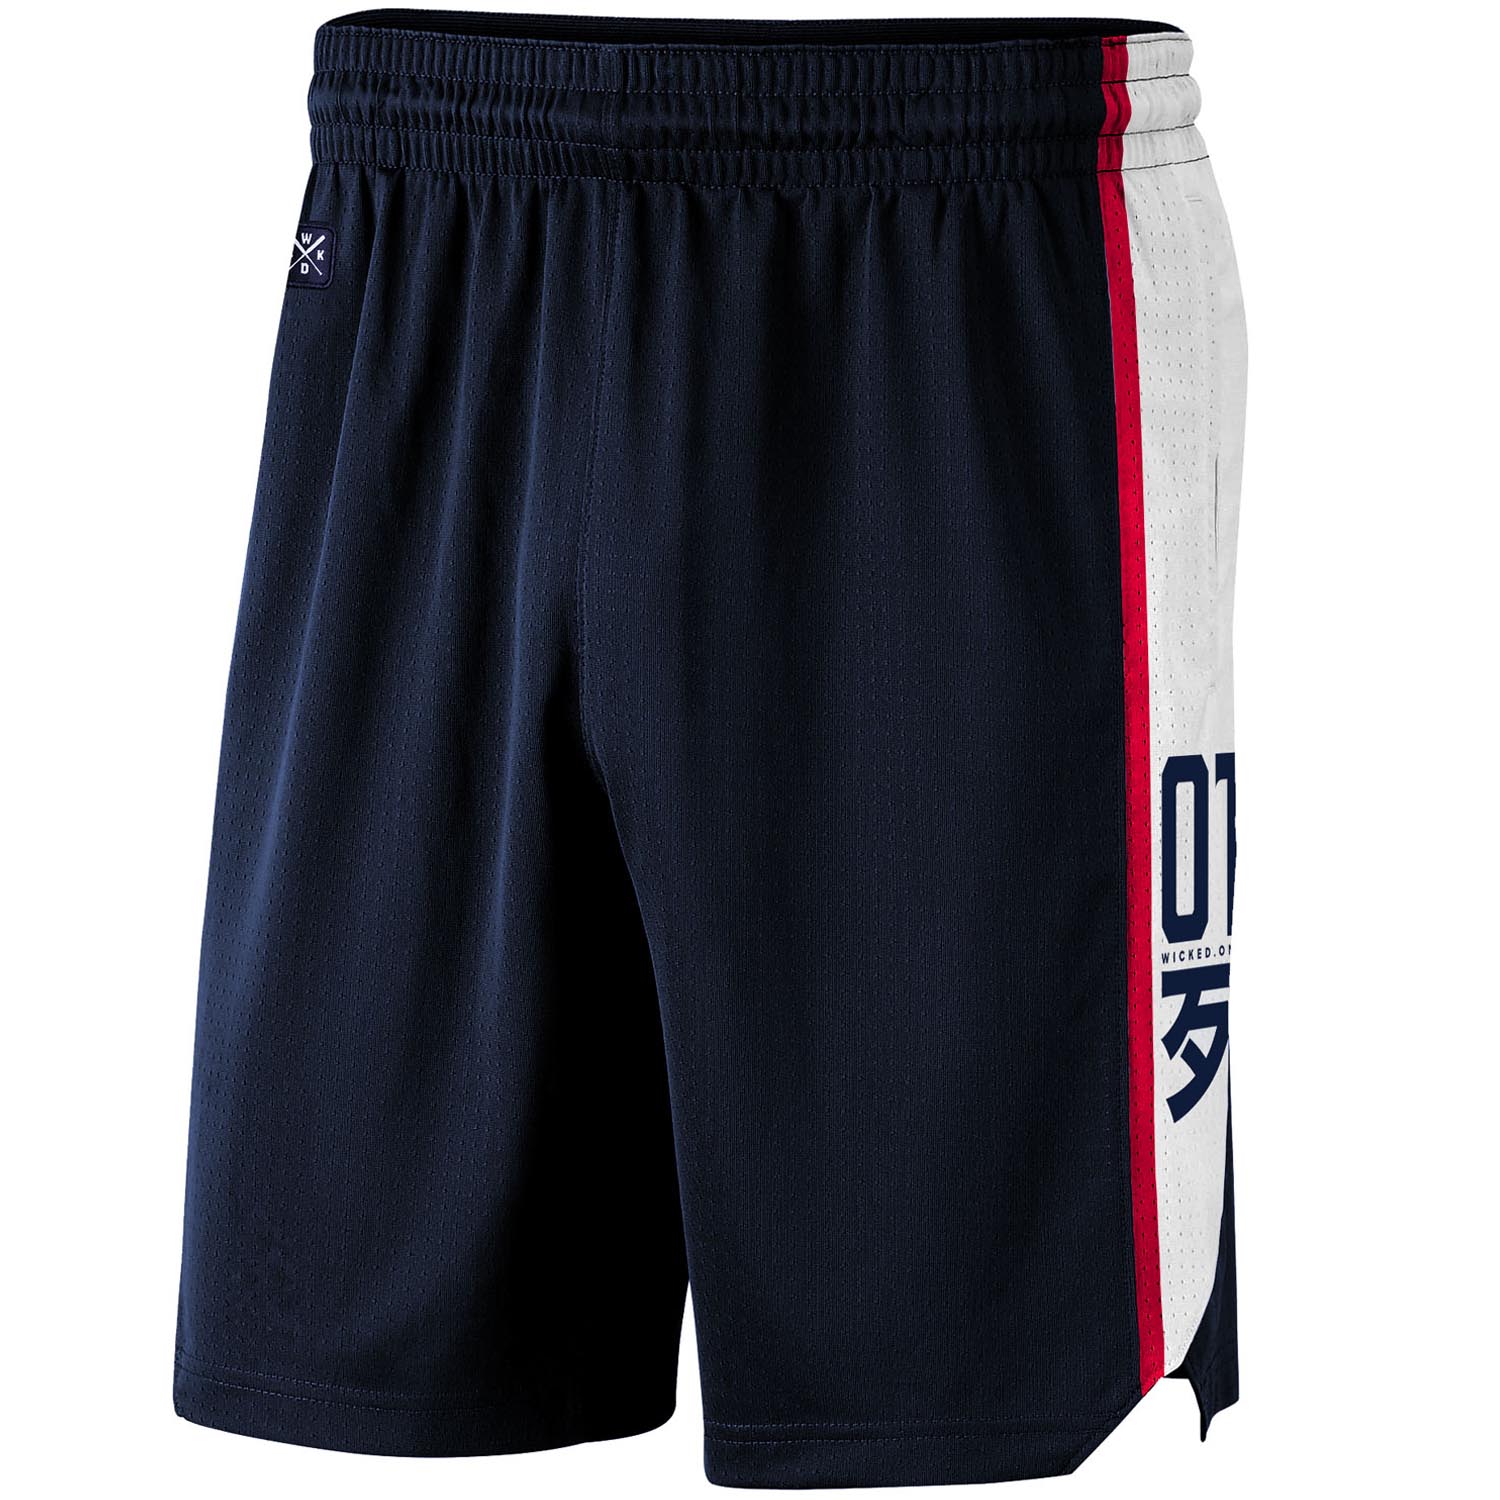 Wicked One Fitness Shorts, Indian, navy